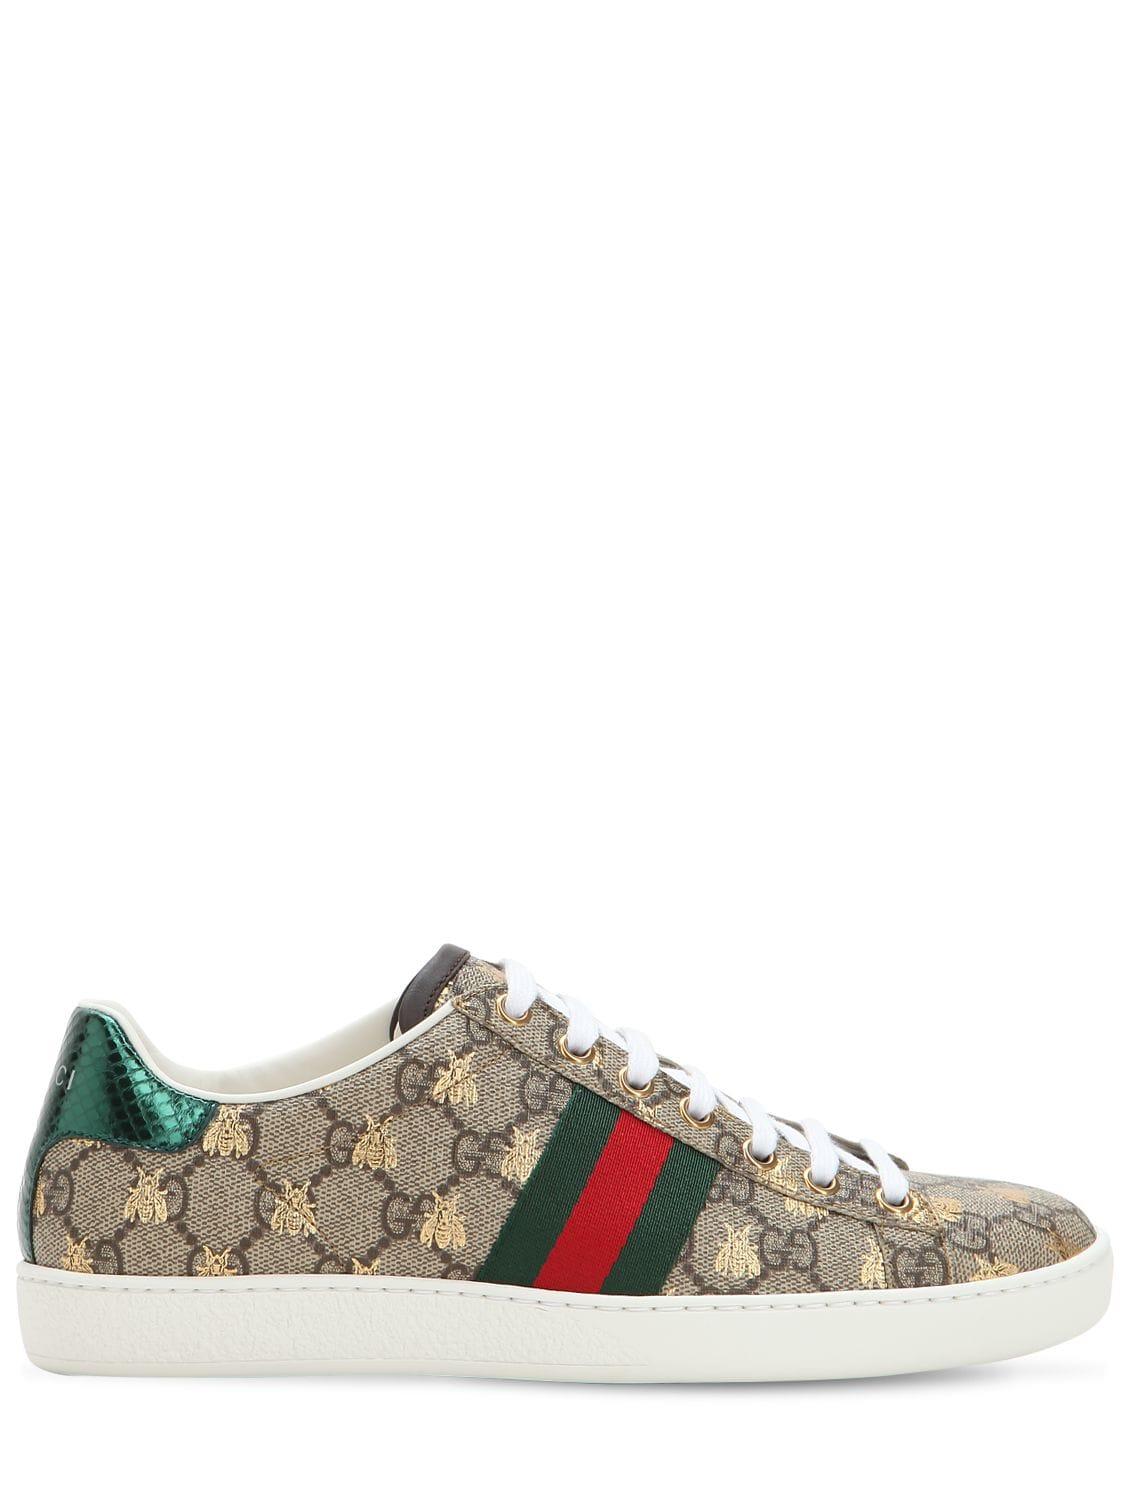 Gucci 20mm New Ace Gg Supreme Canvas Sneakers in Green - Lyst